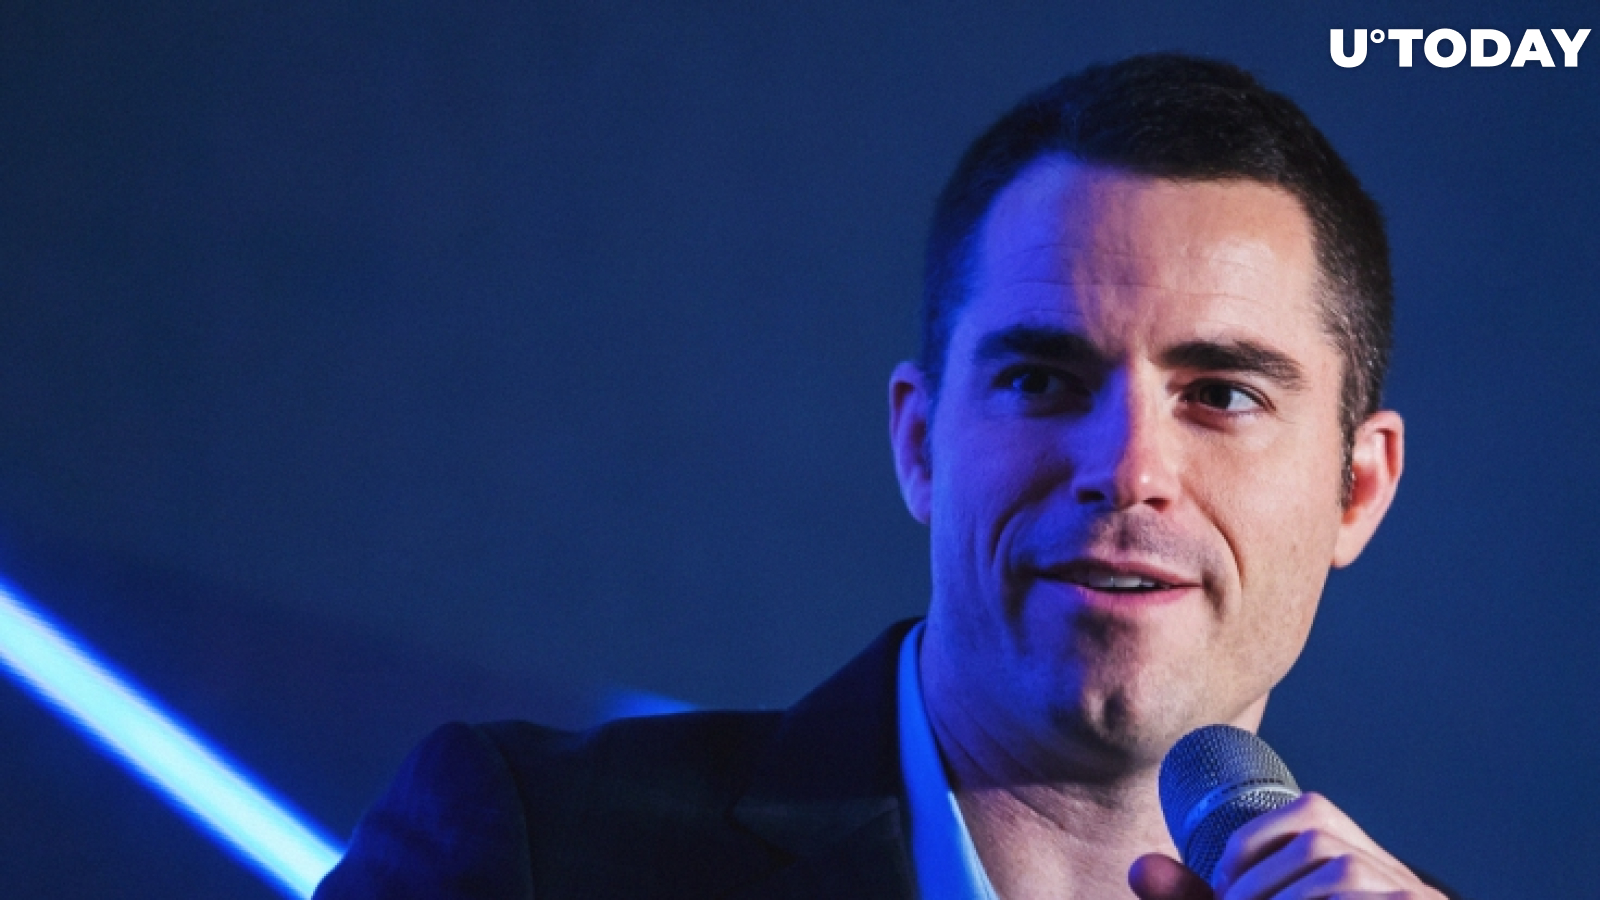 Anarcho-Capitalist NEWS: Crypto Libertarian Roger Ver Changes His Tune on COVID-19 1671.JPG